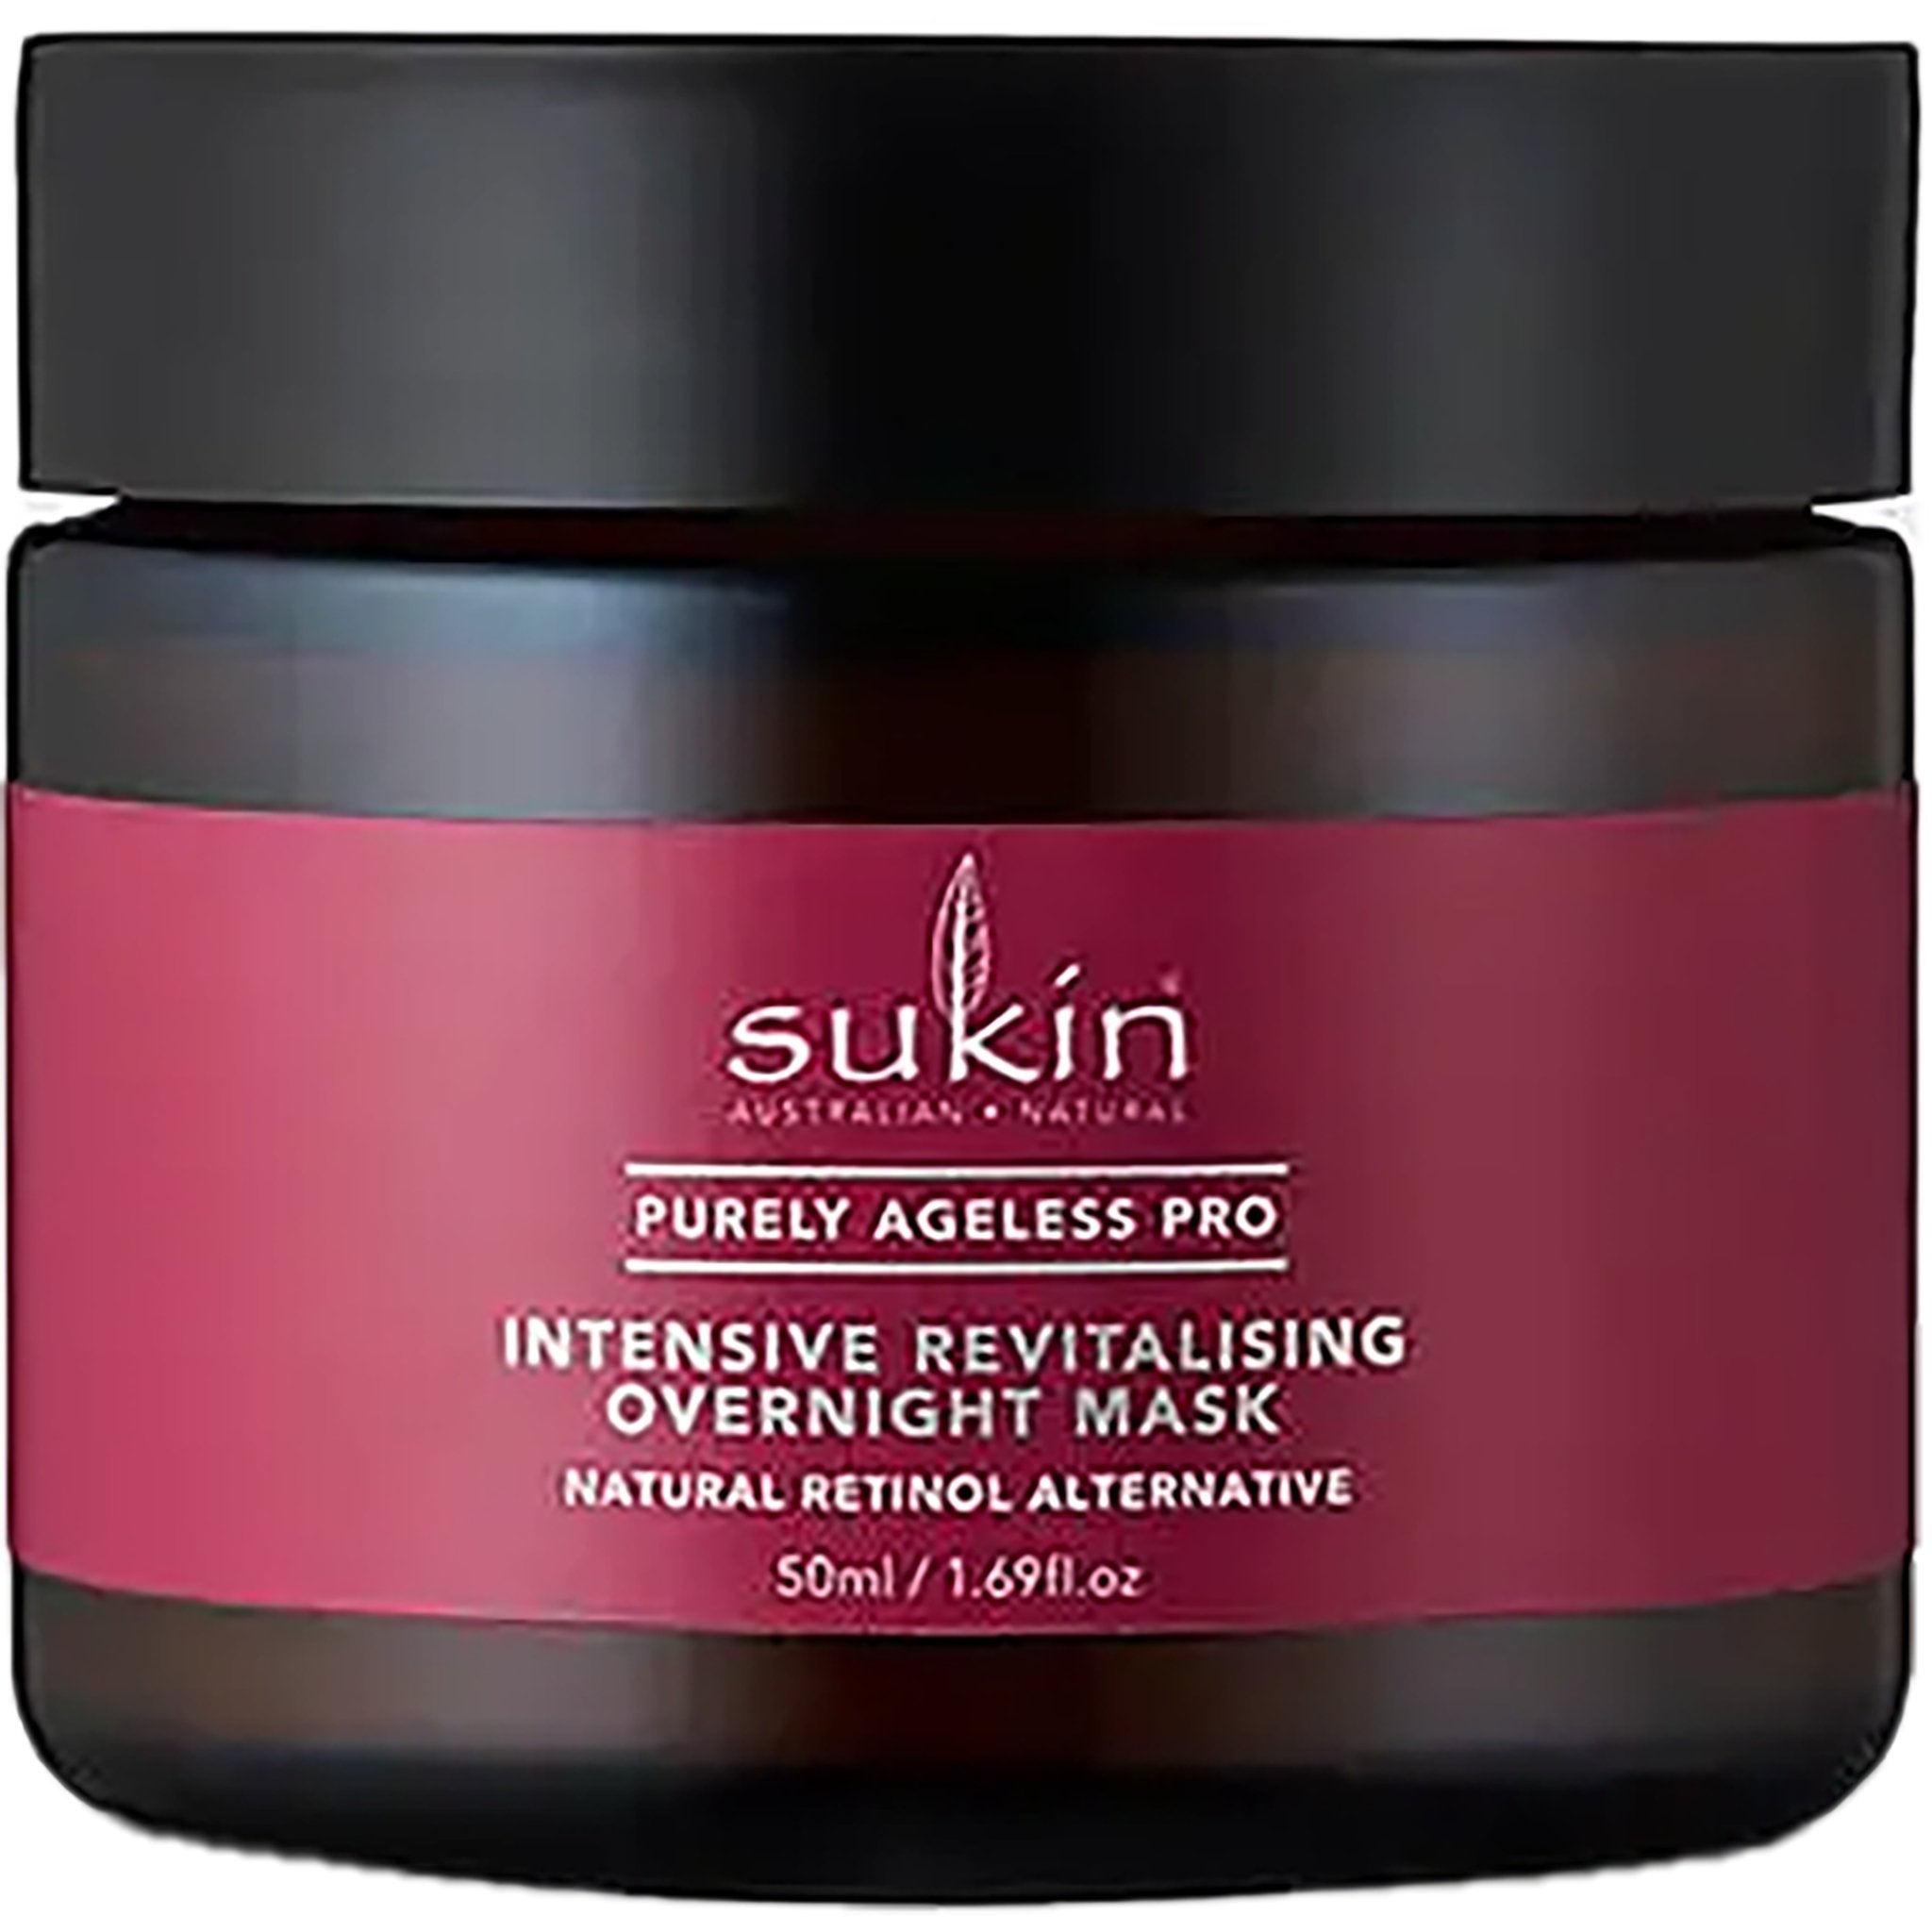 Purely Ageless Pro Intensive Revitalising Overnight Mask - mypure.co.uk